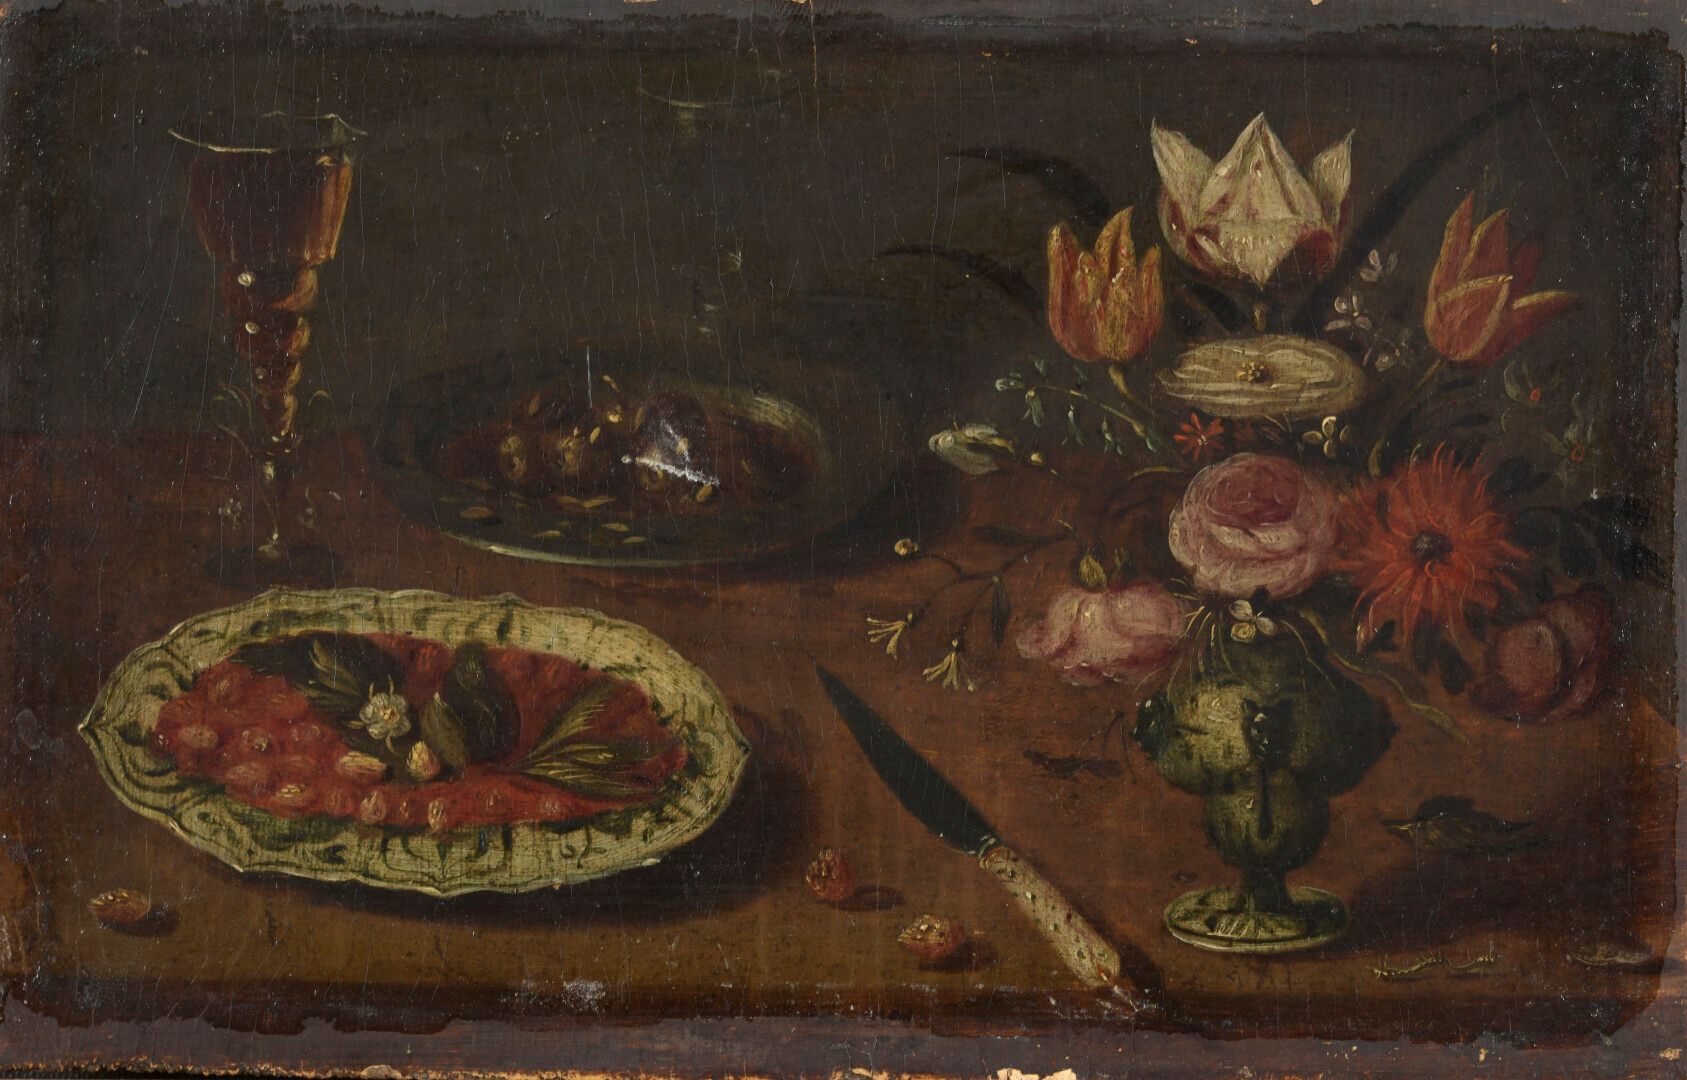 Null Flemish school around 1600, workshop of Osiaas BEERT

Still life with a bow&hellip;